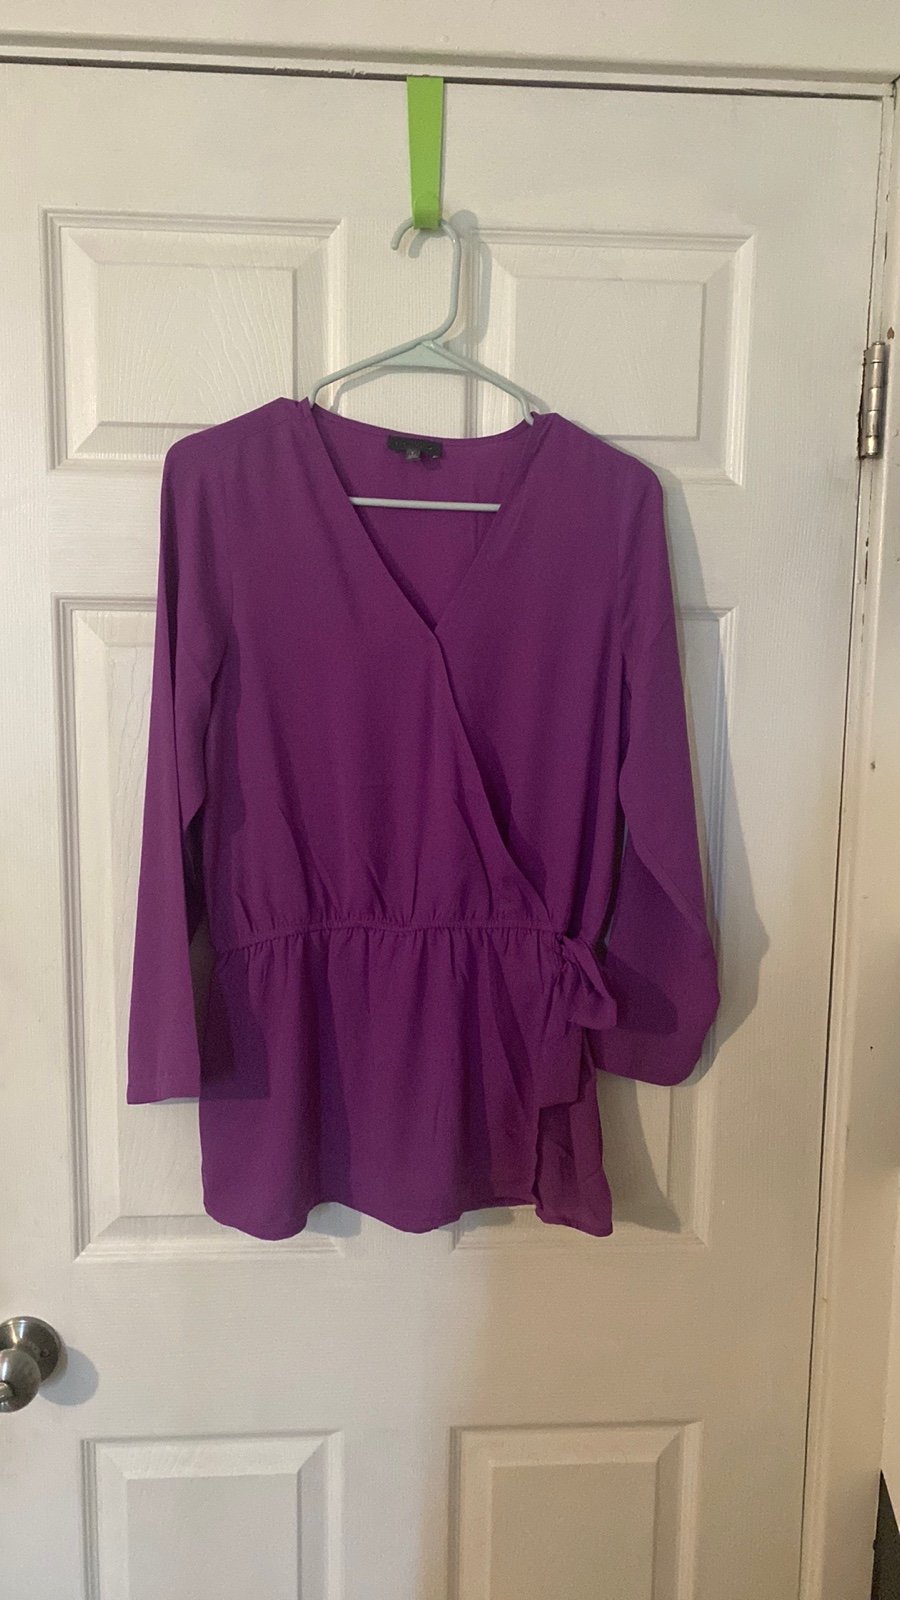 Authentic The limited quarter sleeve wrap blouse obhFqw